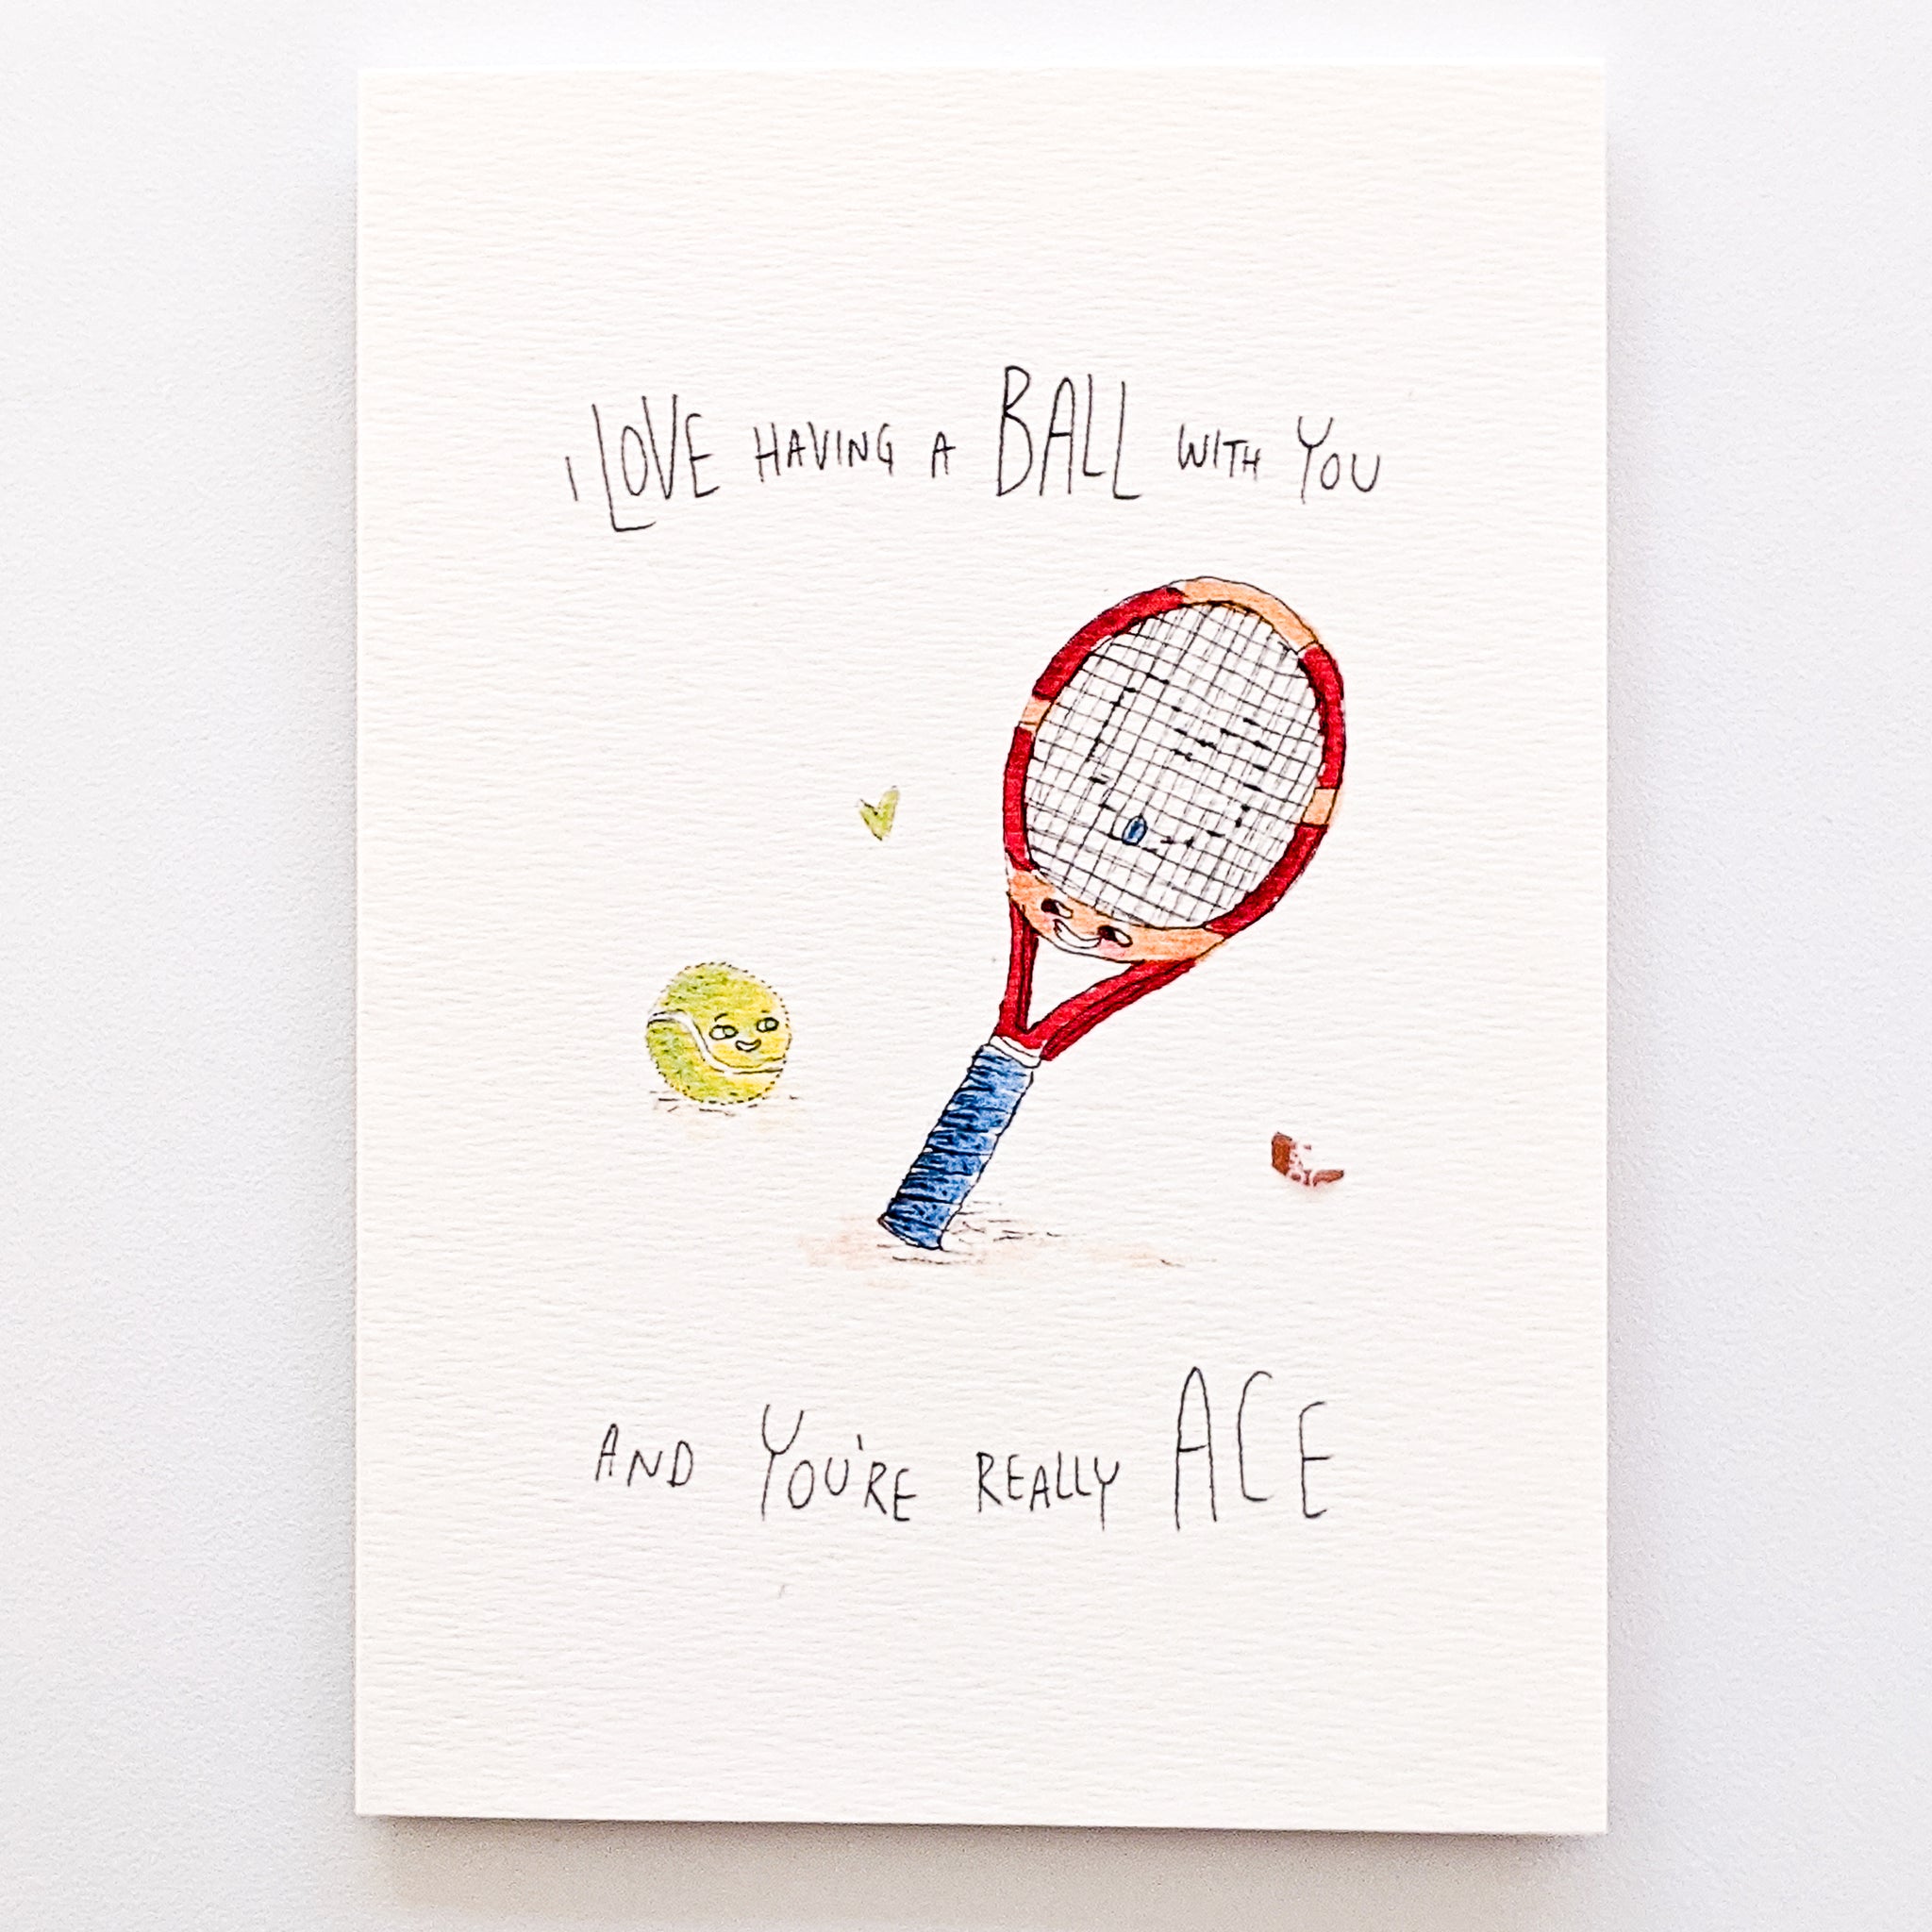 I Love Having a Ball with You and I Think You're Really Ace | lovely card | hand-made card